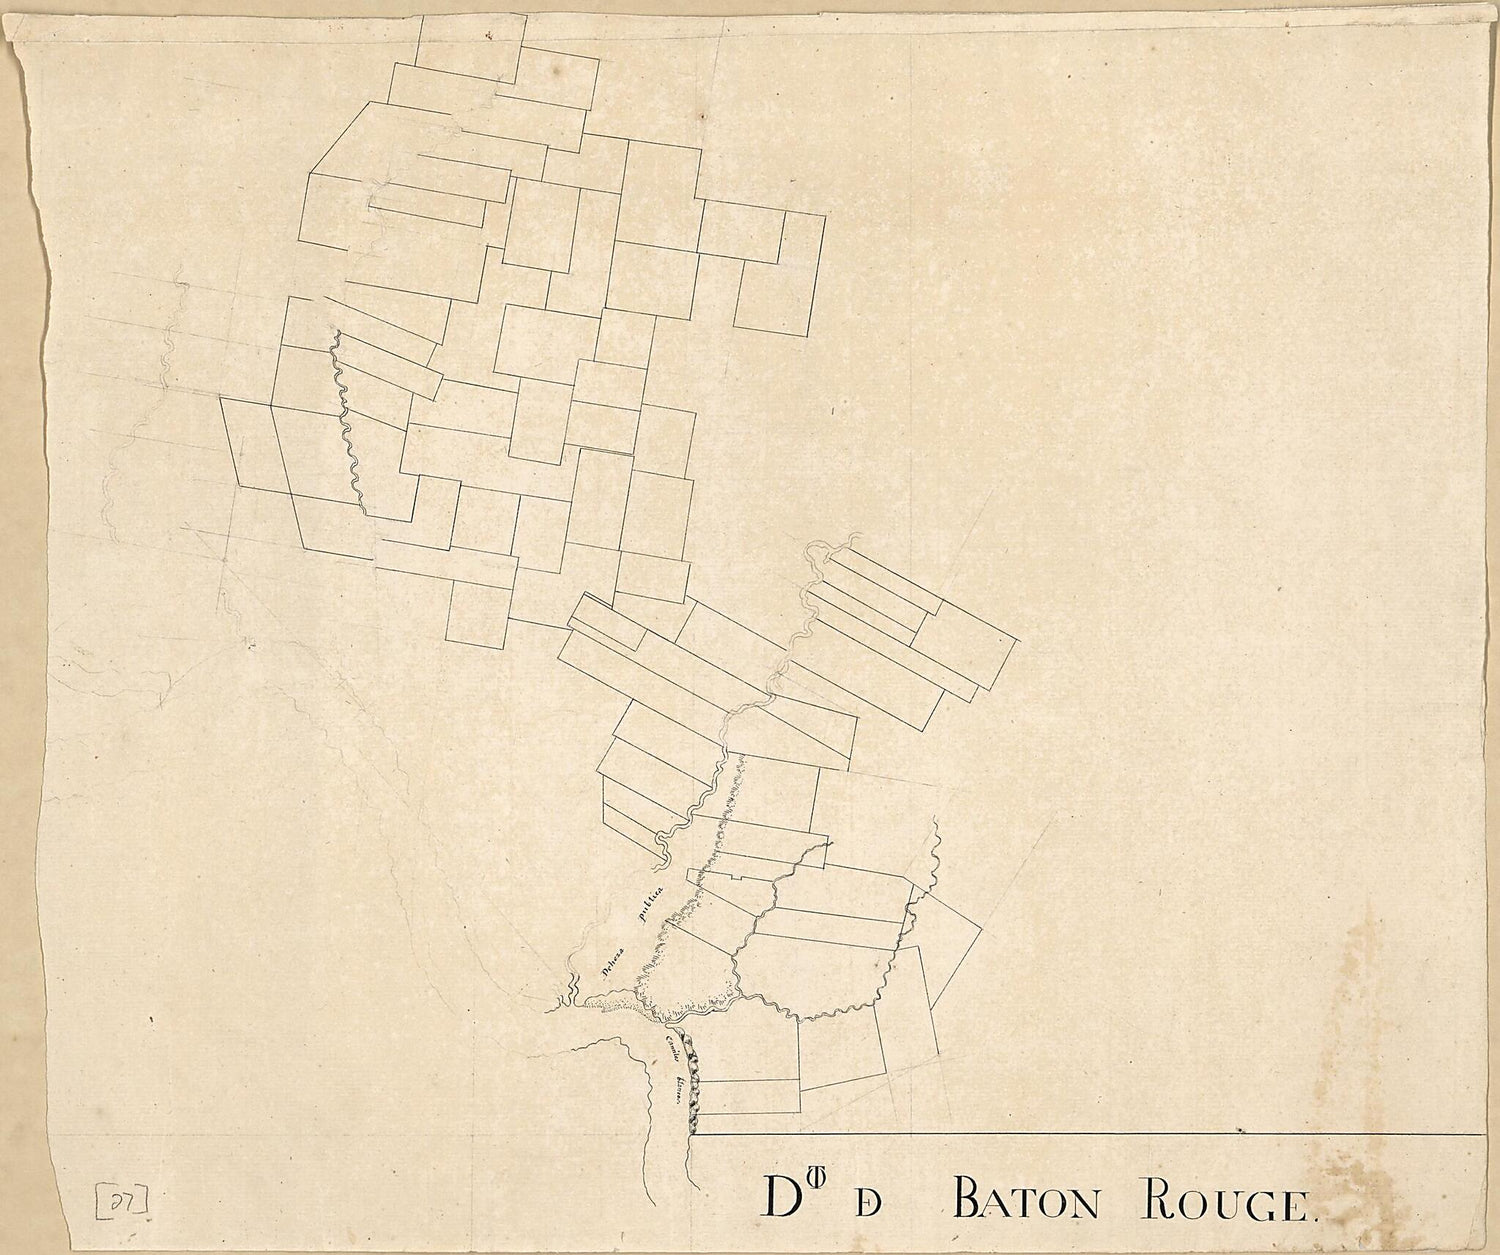 This old map of Dto De Baton Rouge from 1799 was created by Vicente Sebastián Pintado in 1799